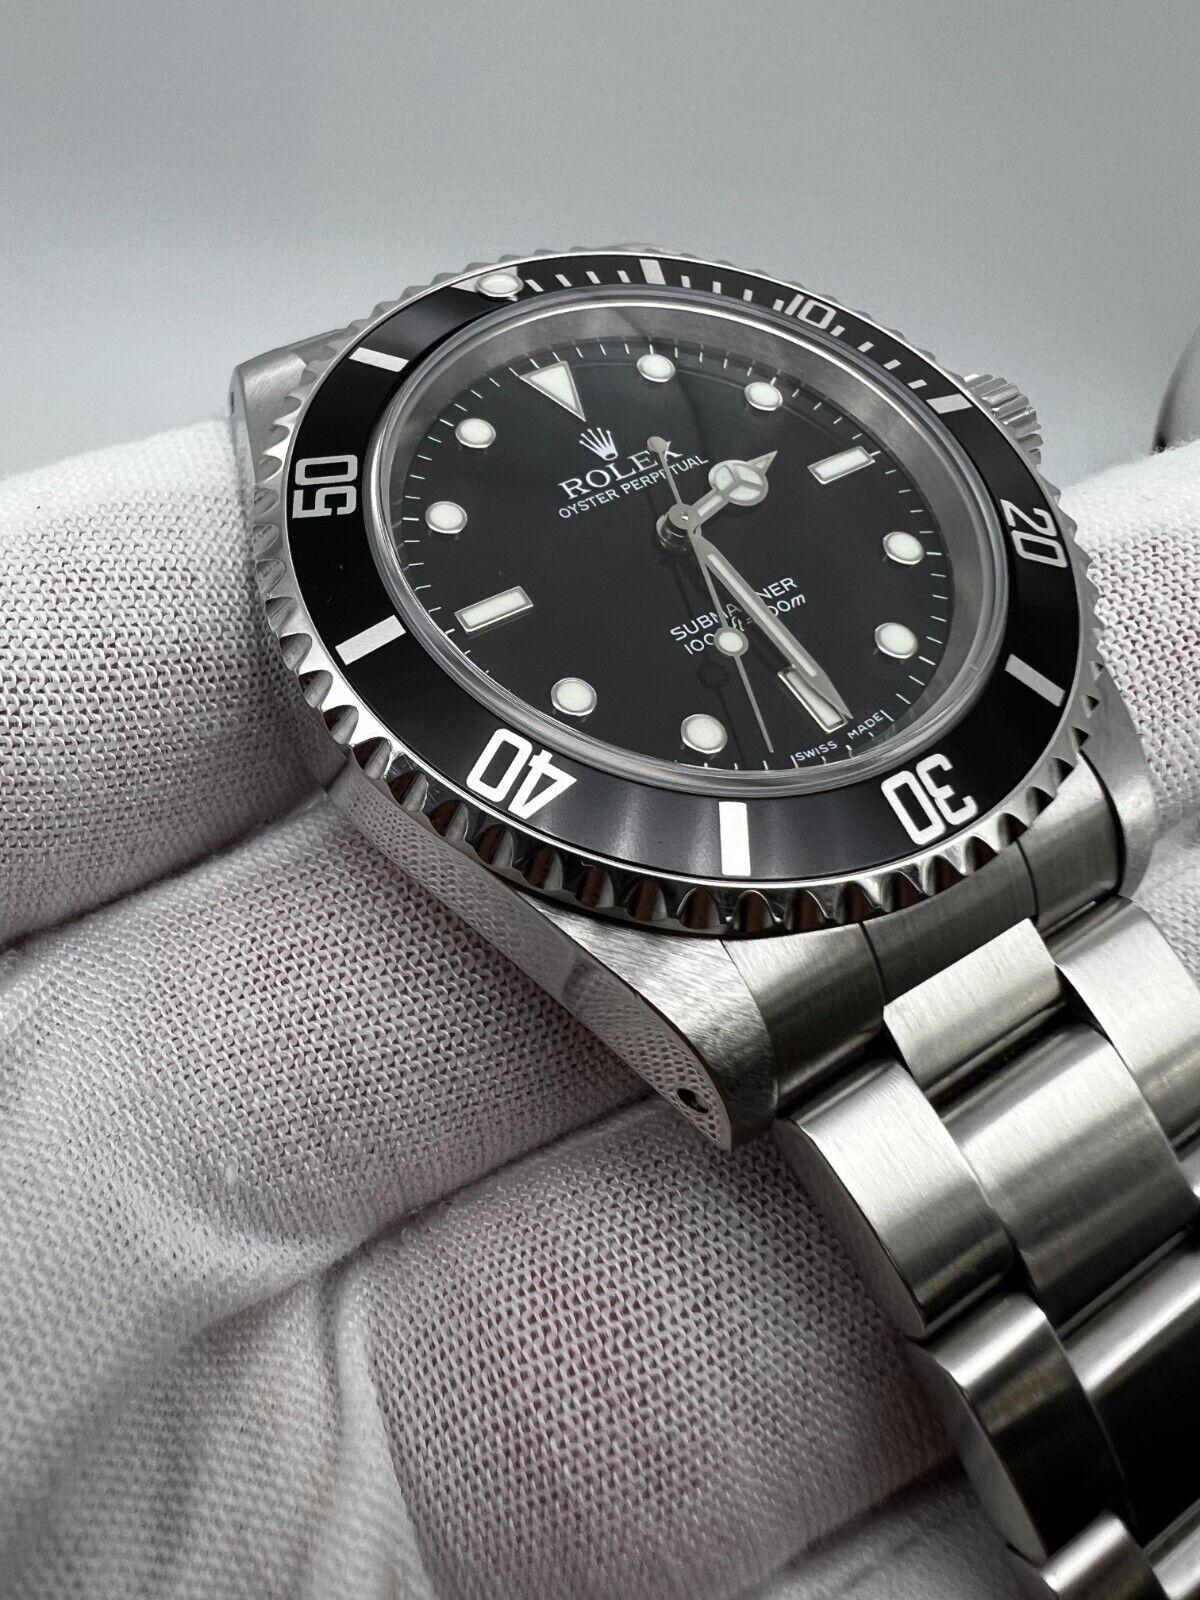 Rolex 14060 Submariner Black Dial Stainless Steel 2006 Box Paper For Sale 4